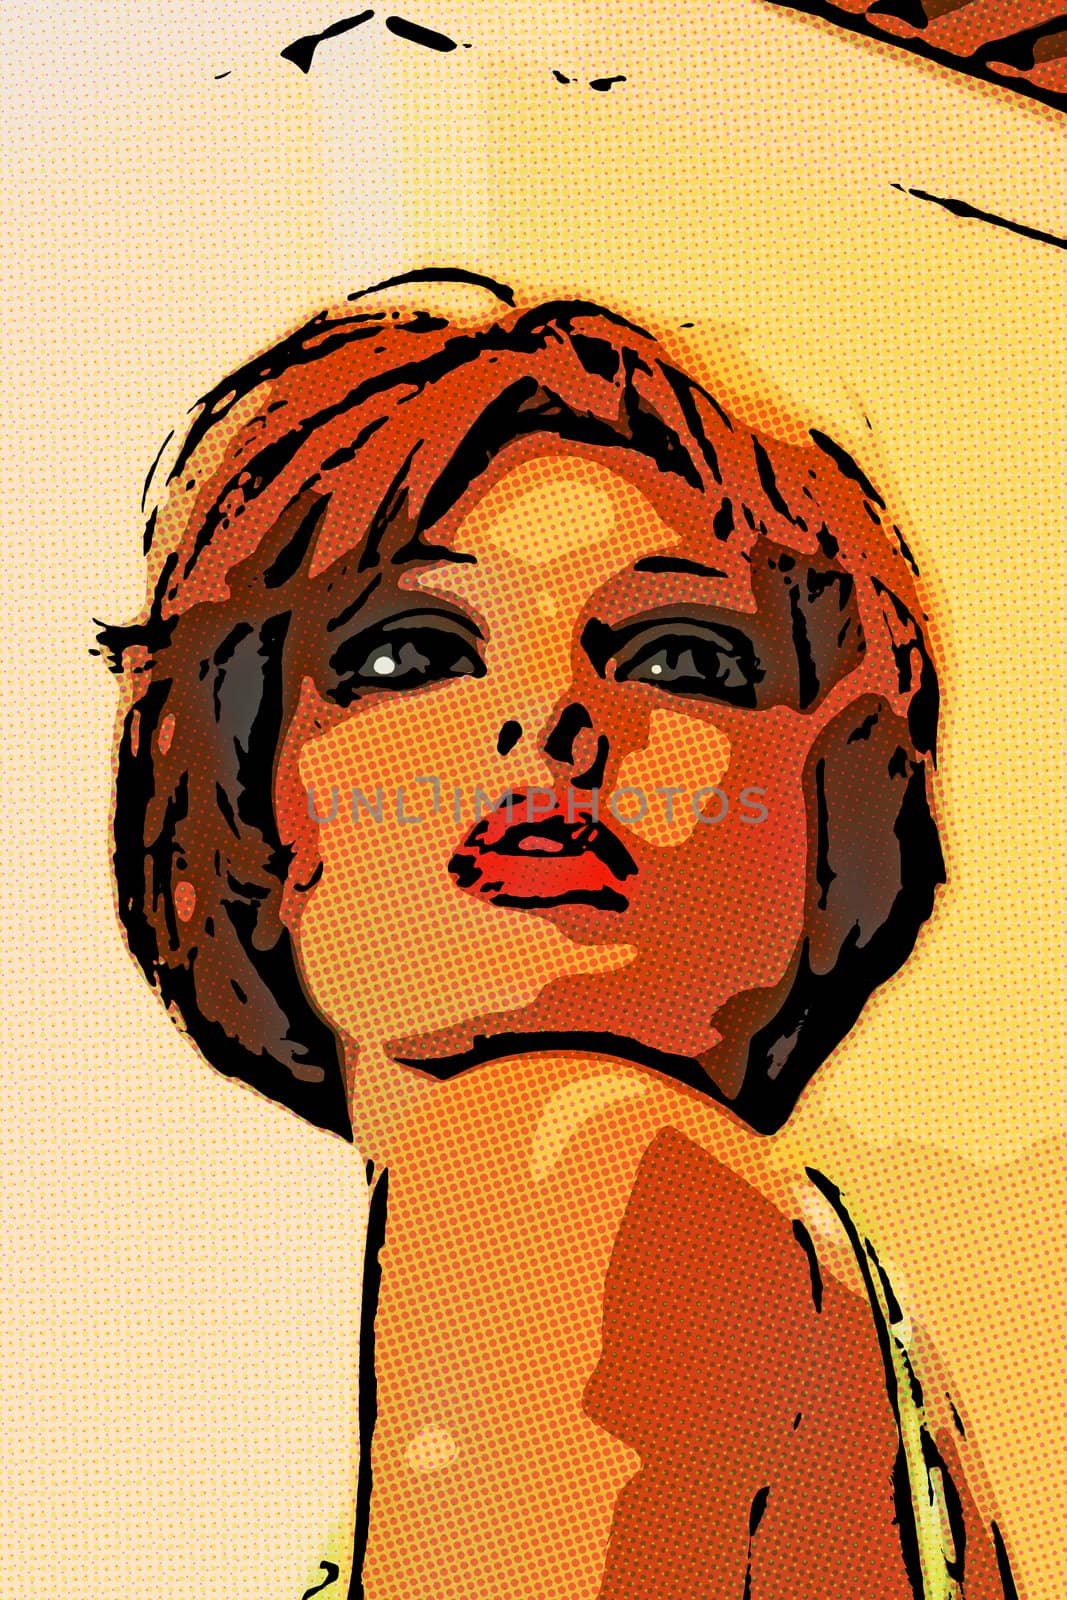 Retro style illustration of a woman